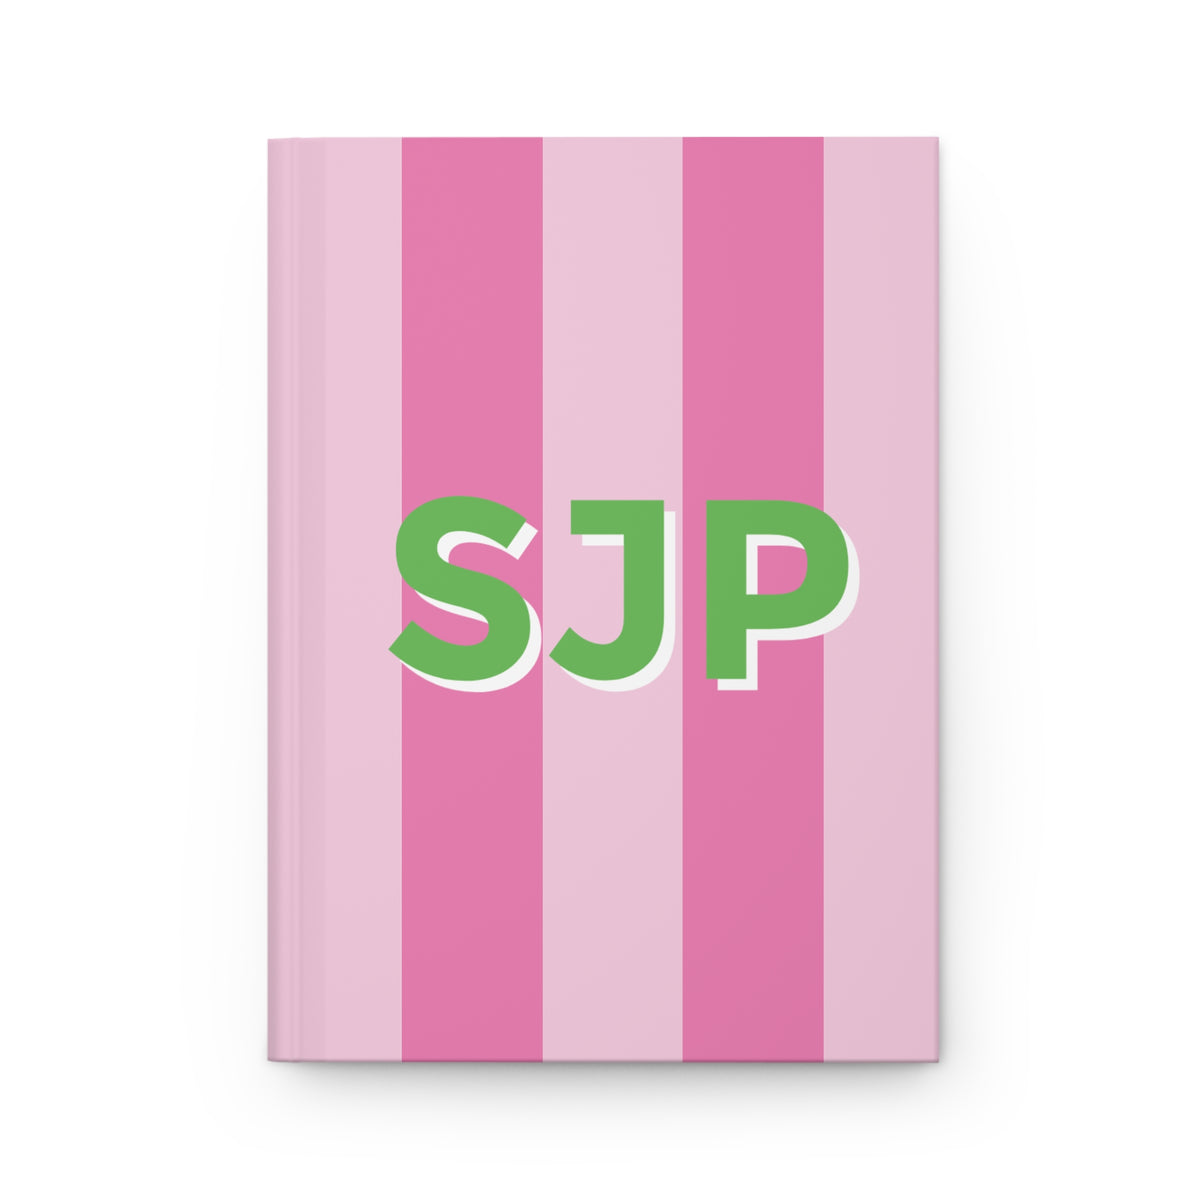 Stripe Monogram Custom Journal Notebook for teacher gift, Mother's Day, Bridemaid party gifts | Pink Stripe + Green